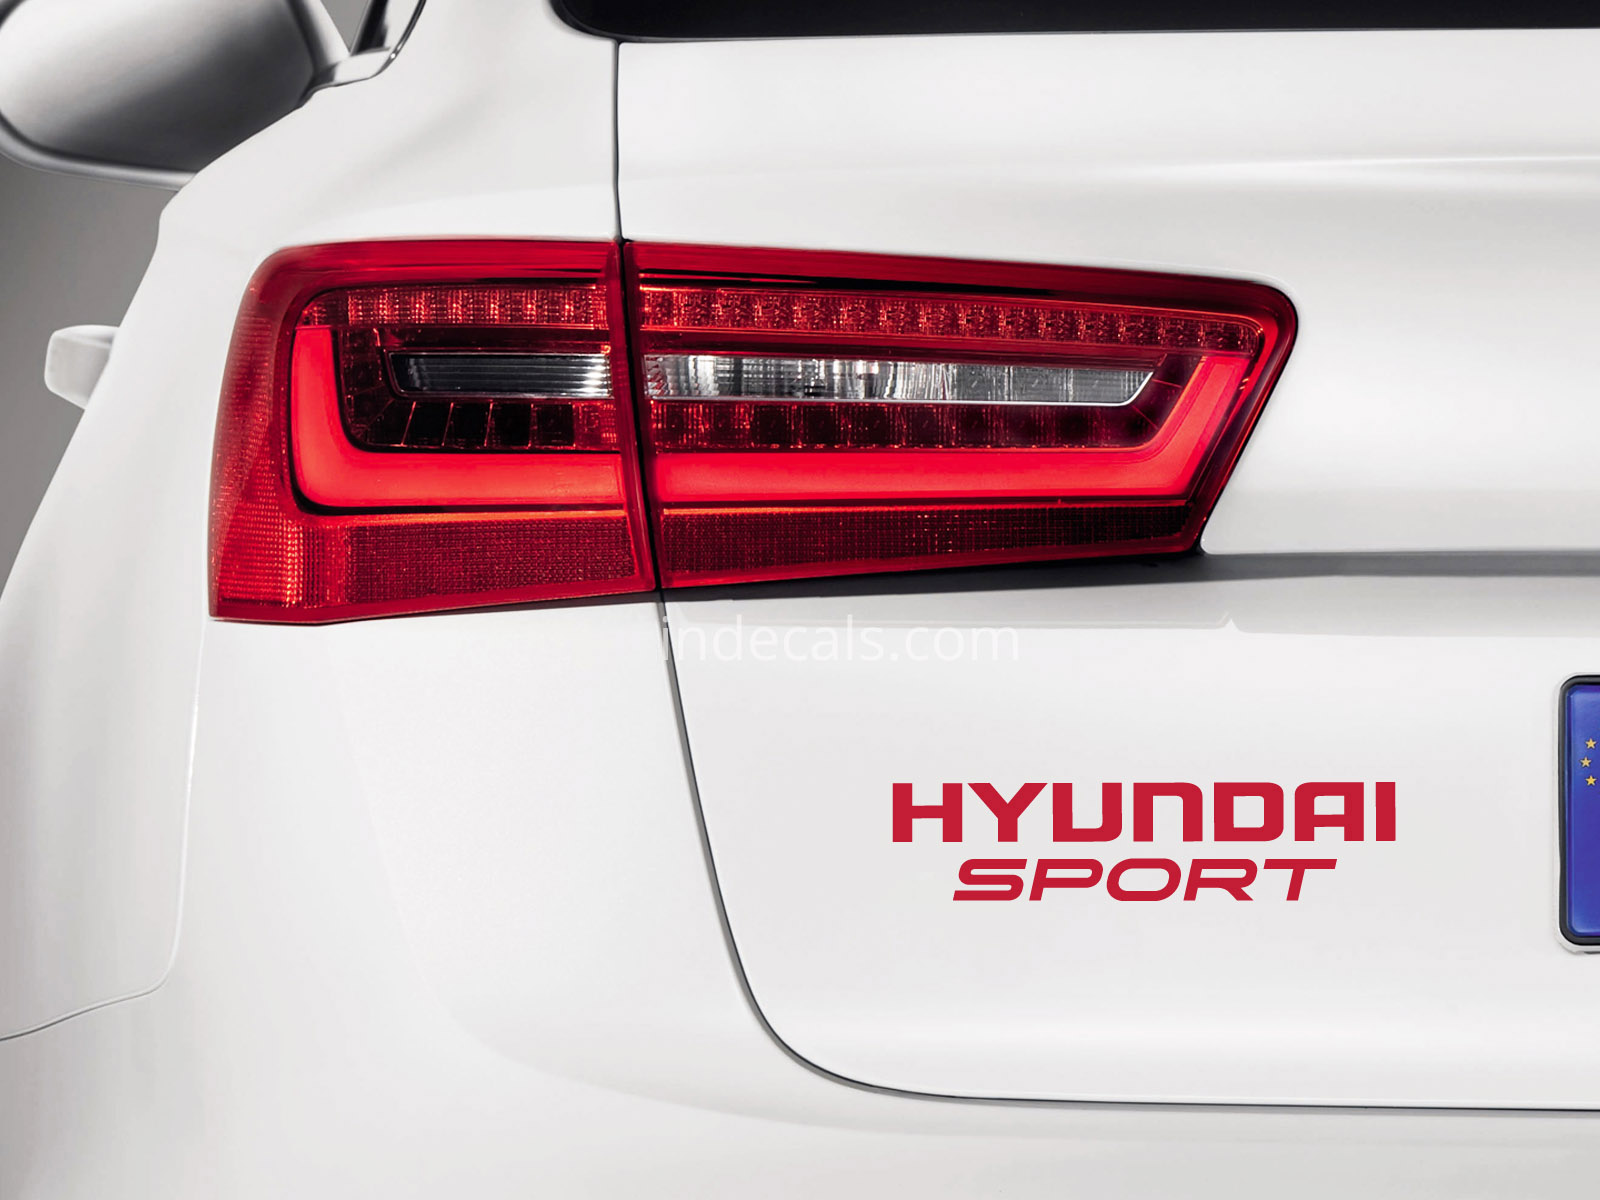 1 x Hyundai Sports Sticker for Trunk - Red